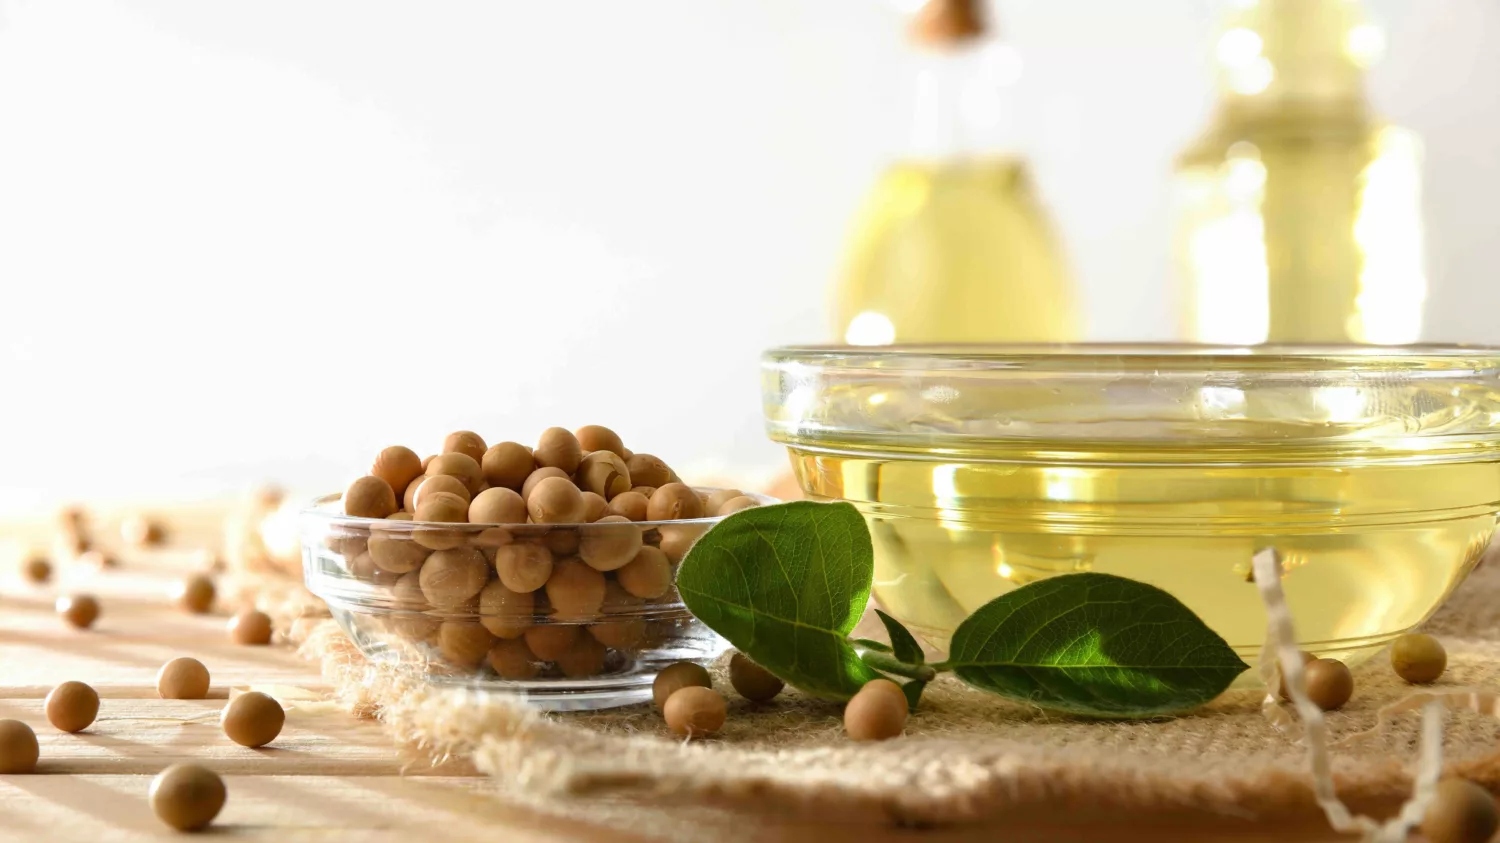 Different presentations of soybeans and soybean oil